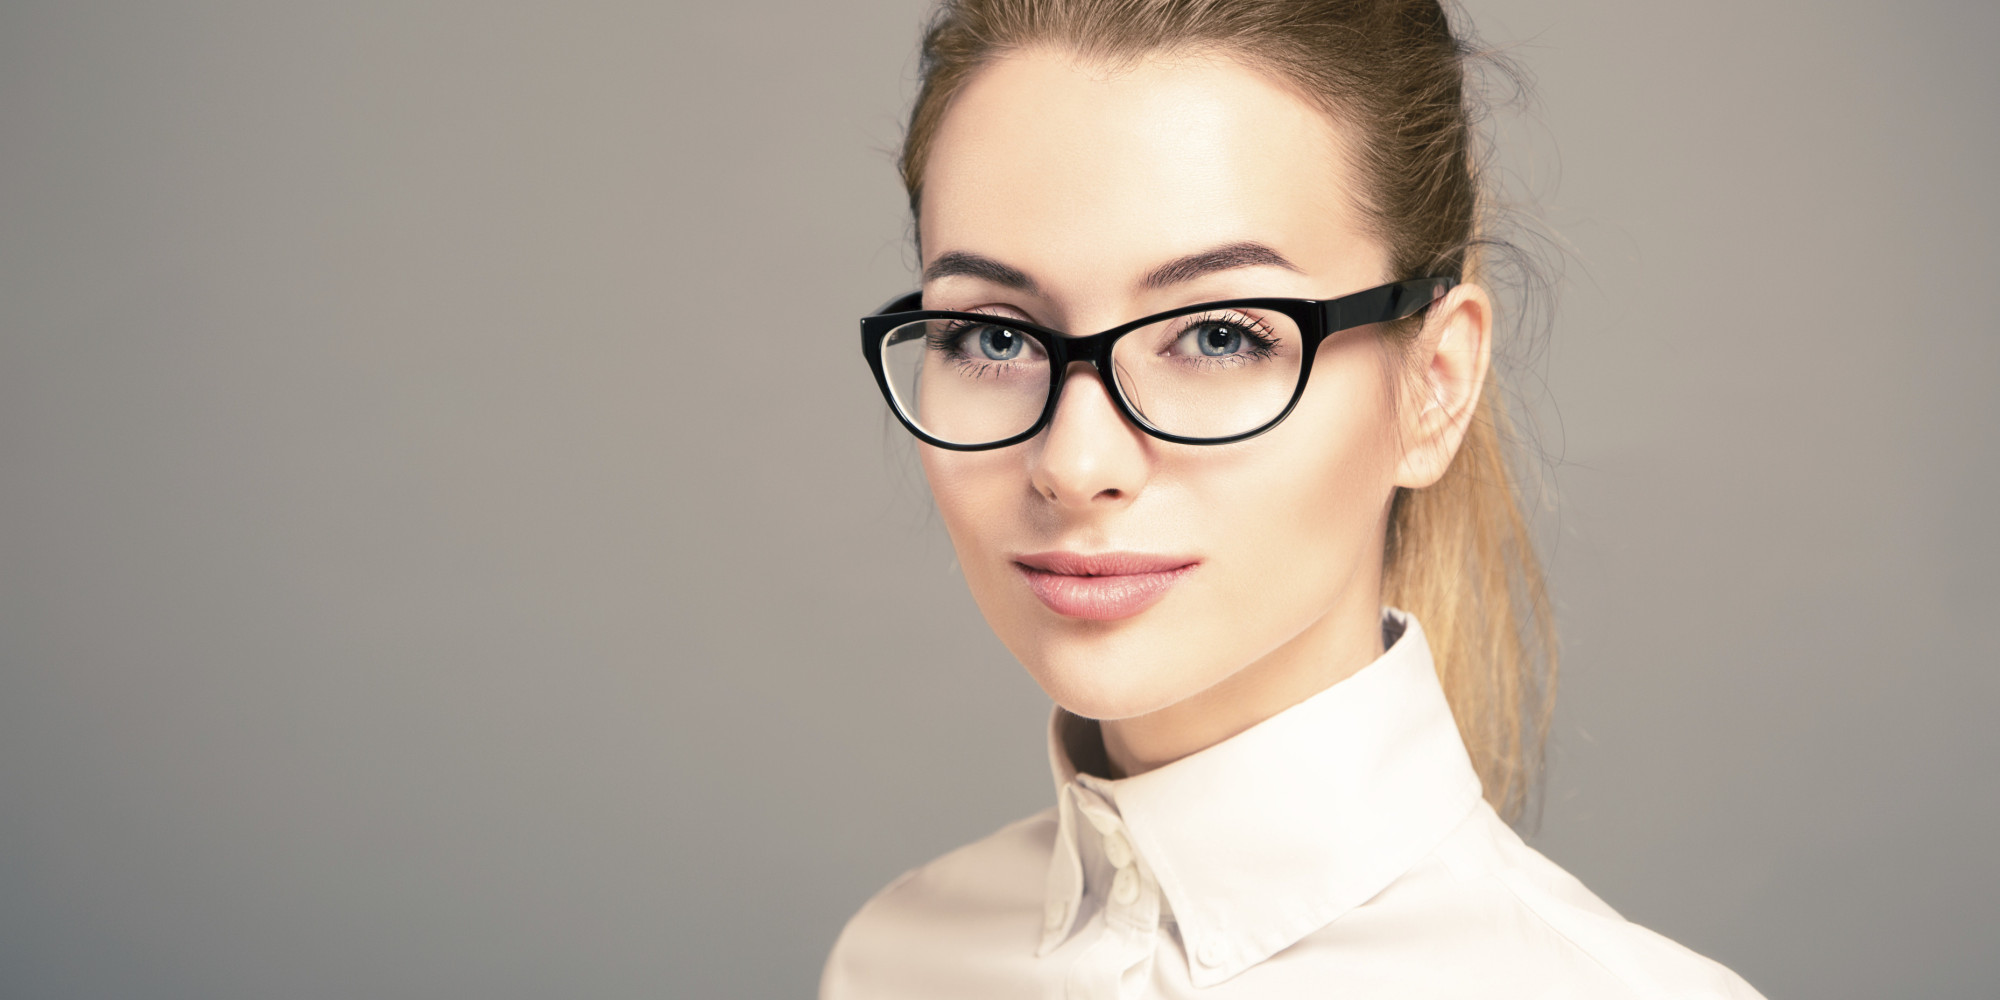 Why Do More Smart People Wear Glasses